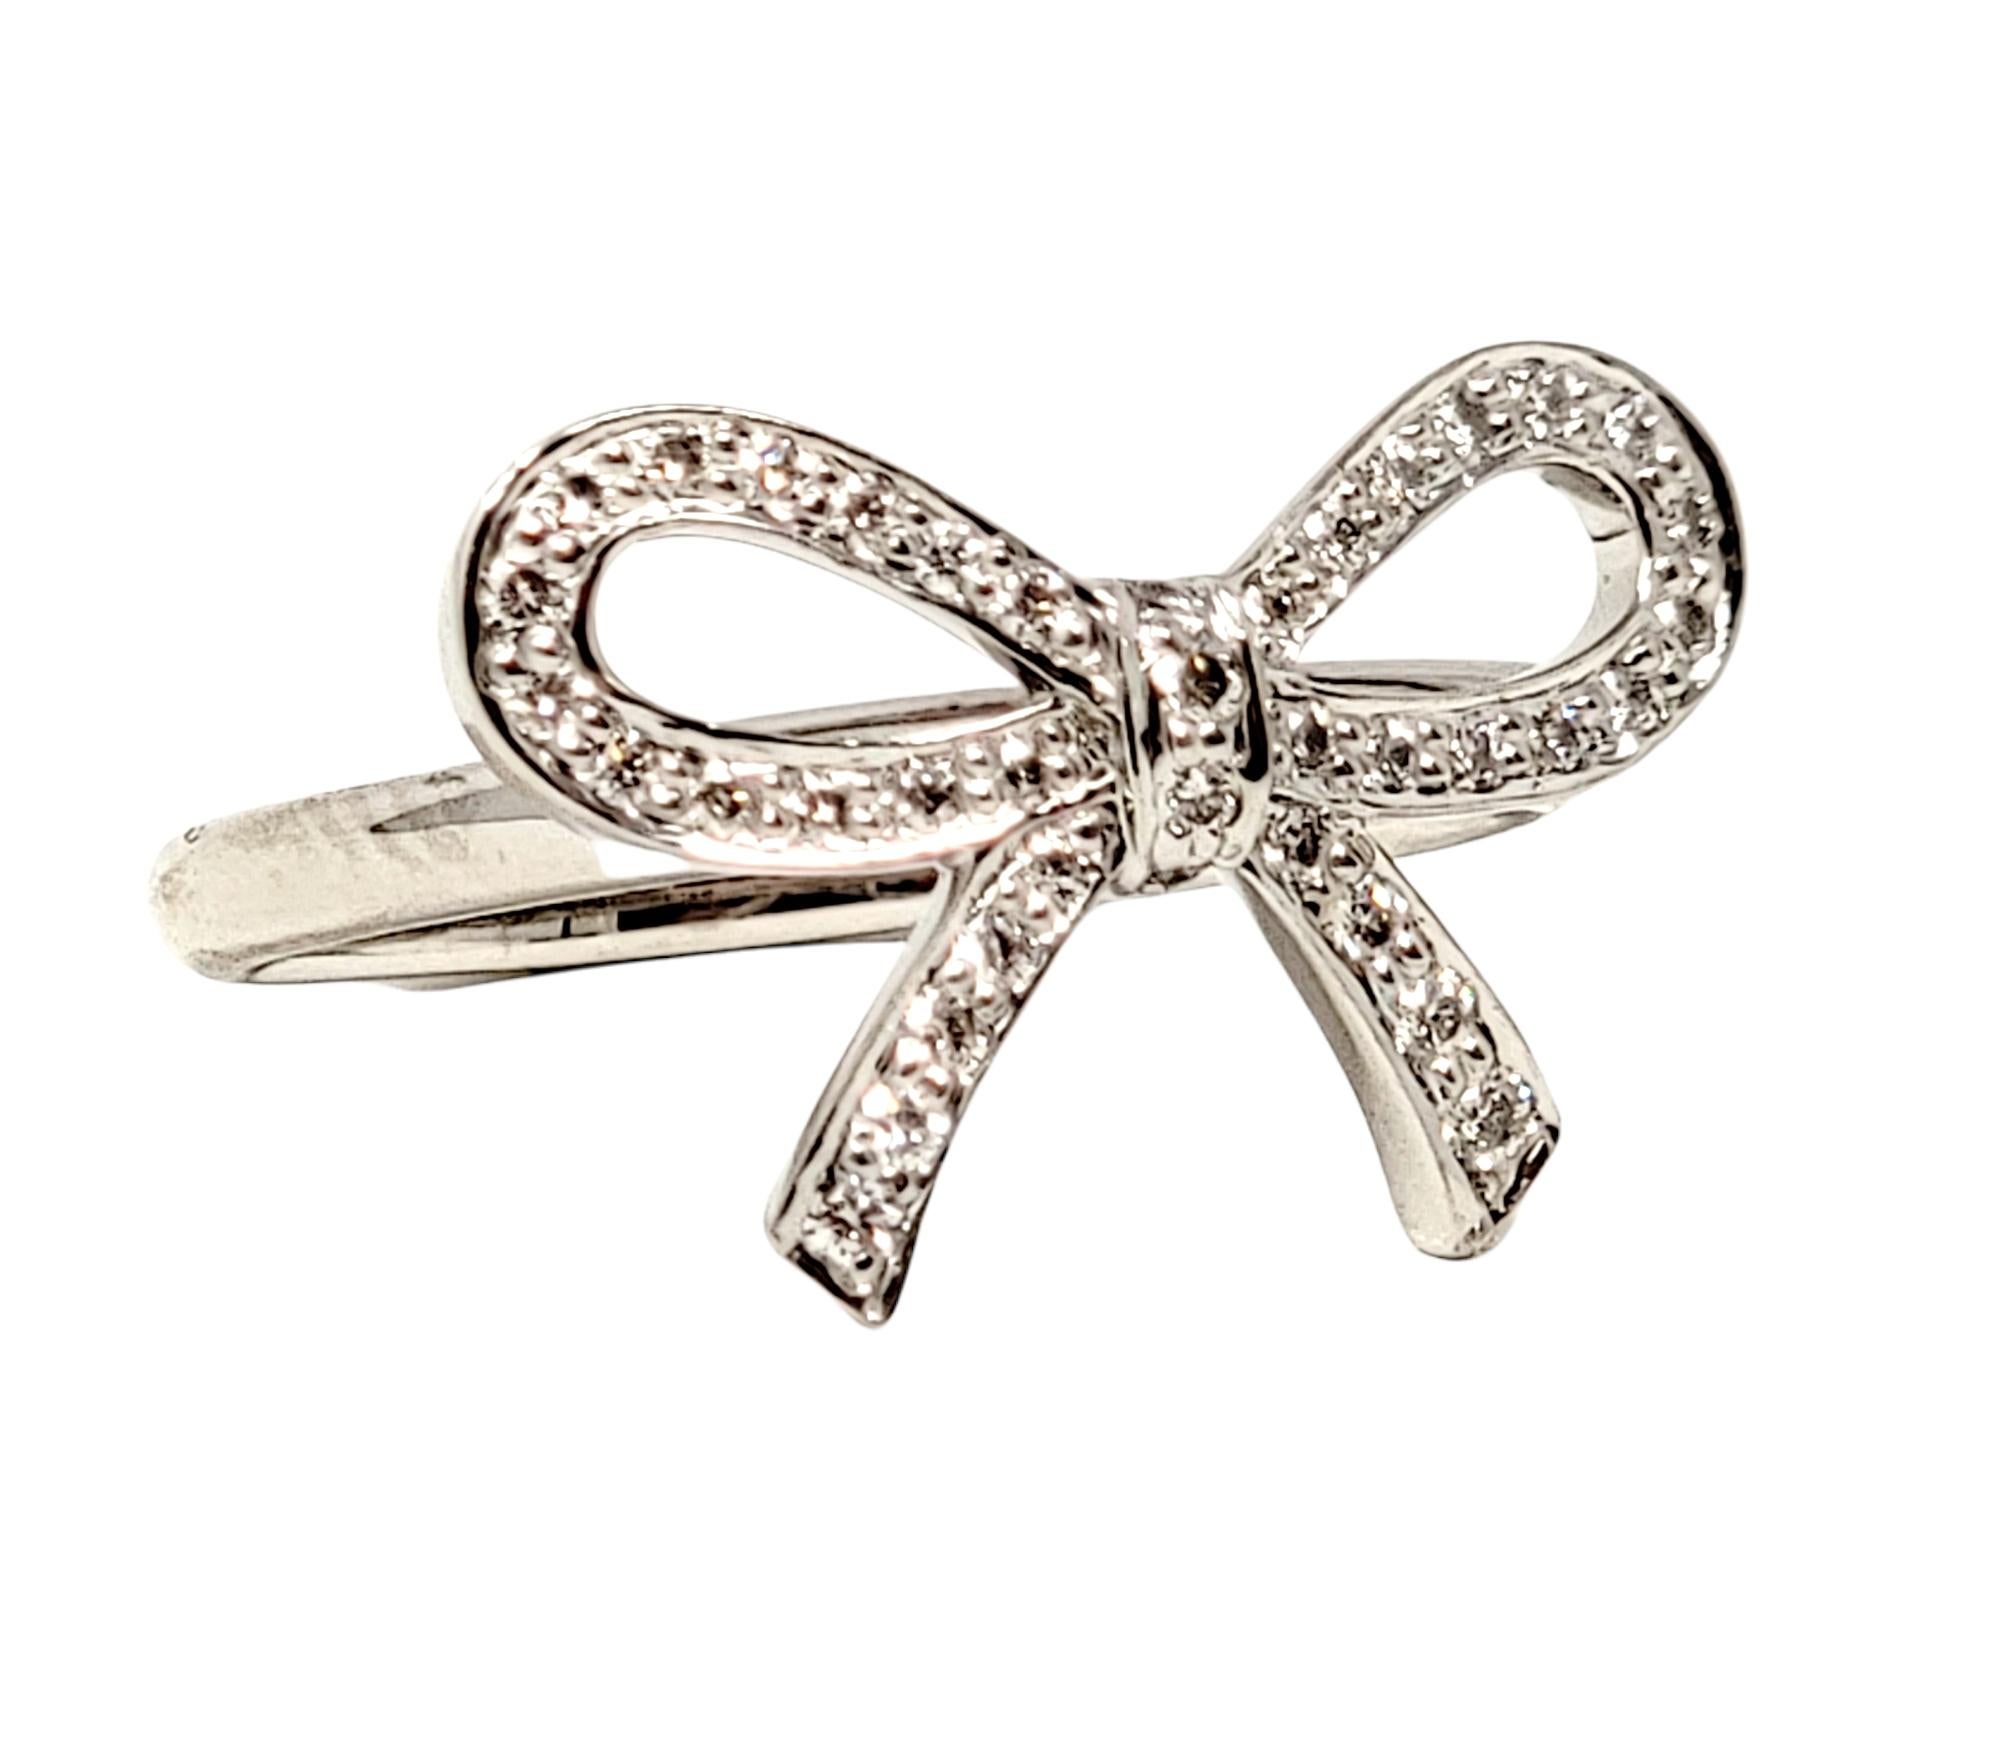 Ring size: 4.25

Absolutely lovely Tiffany & Co. diamond bow ring. This delicate, ultra feminine ring features a timeless design with understated elegance. The beautiful ring features a single bow motif arranged in a horizontal layout on a thin